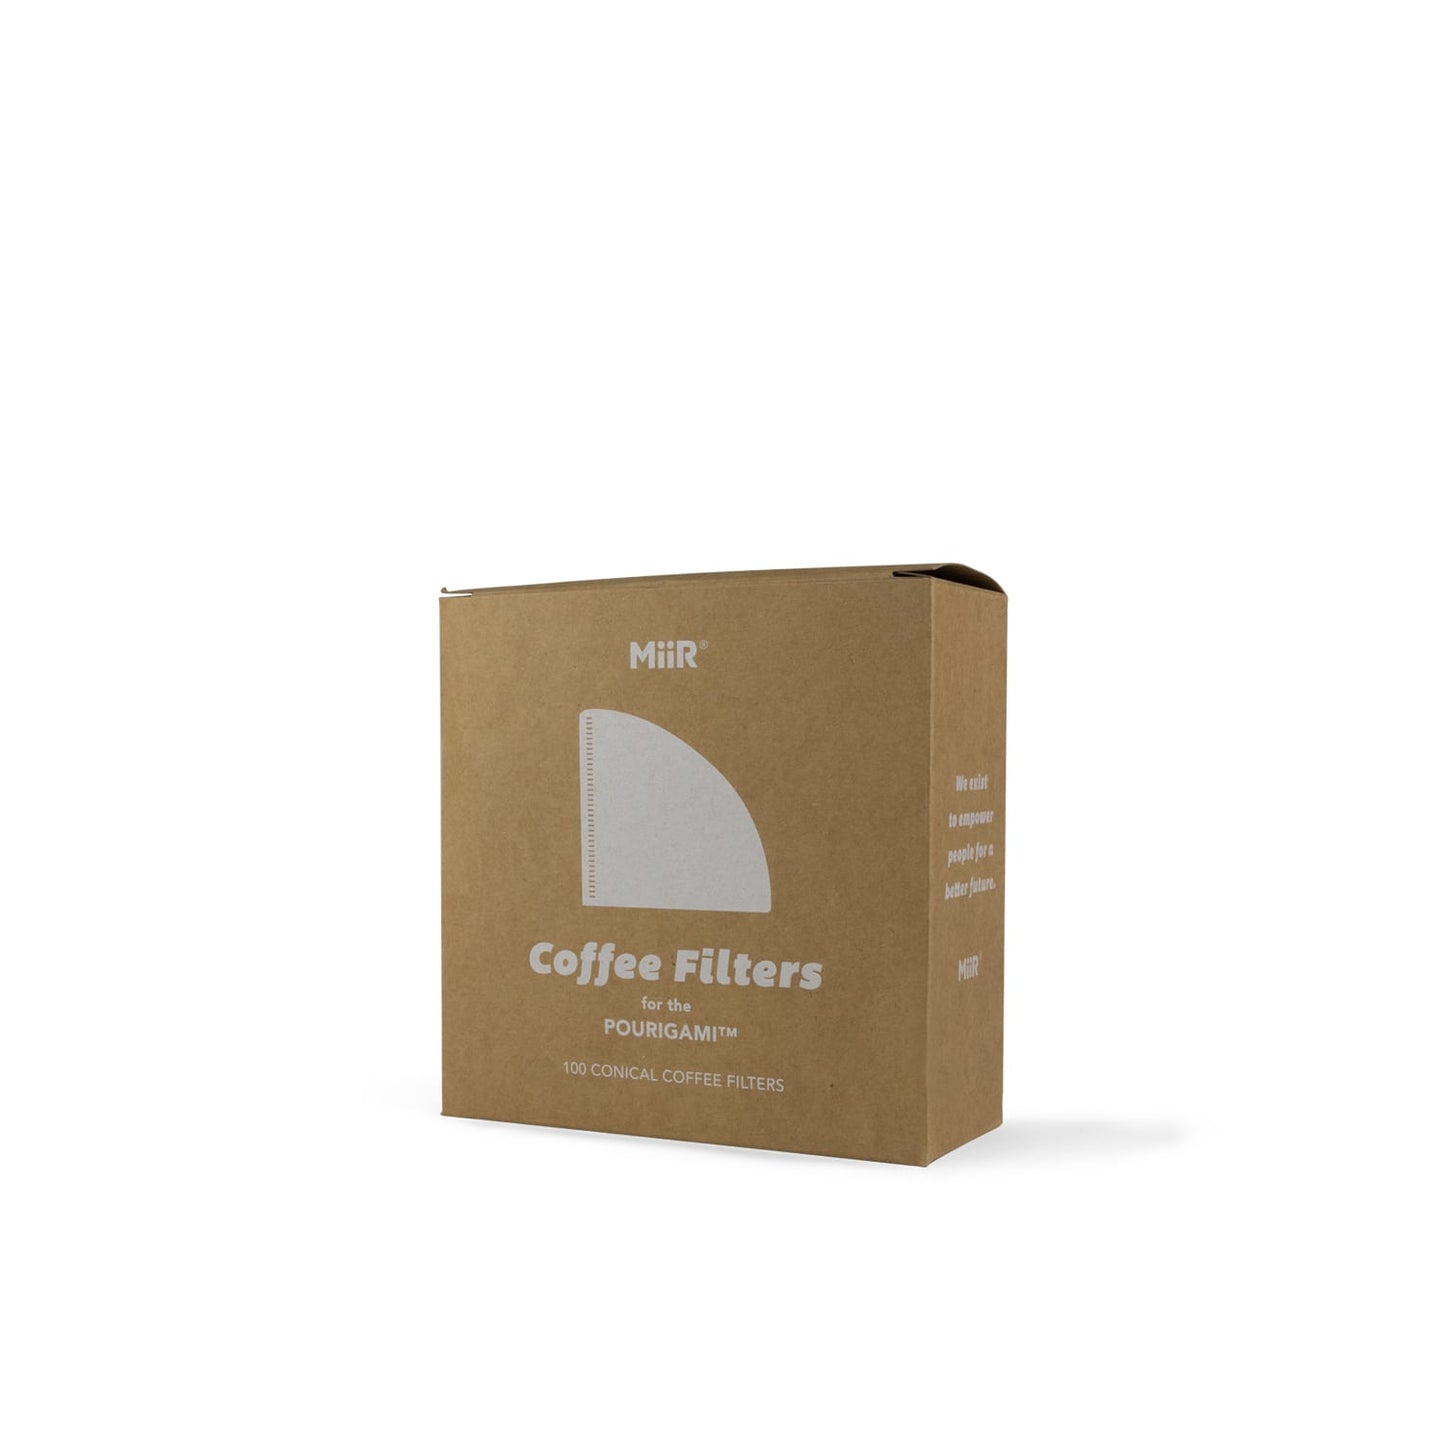 Coffee Filters - 100 Pack